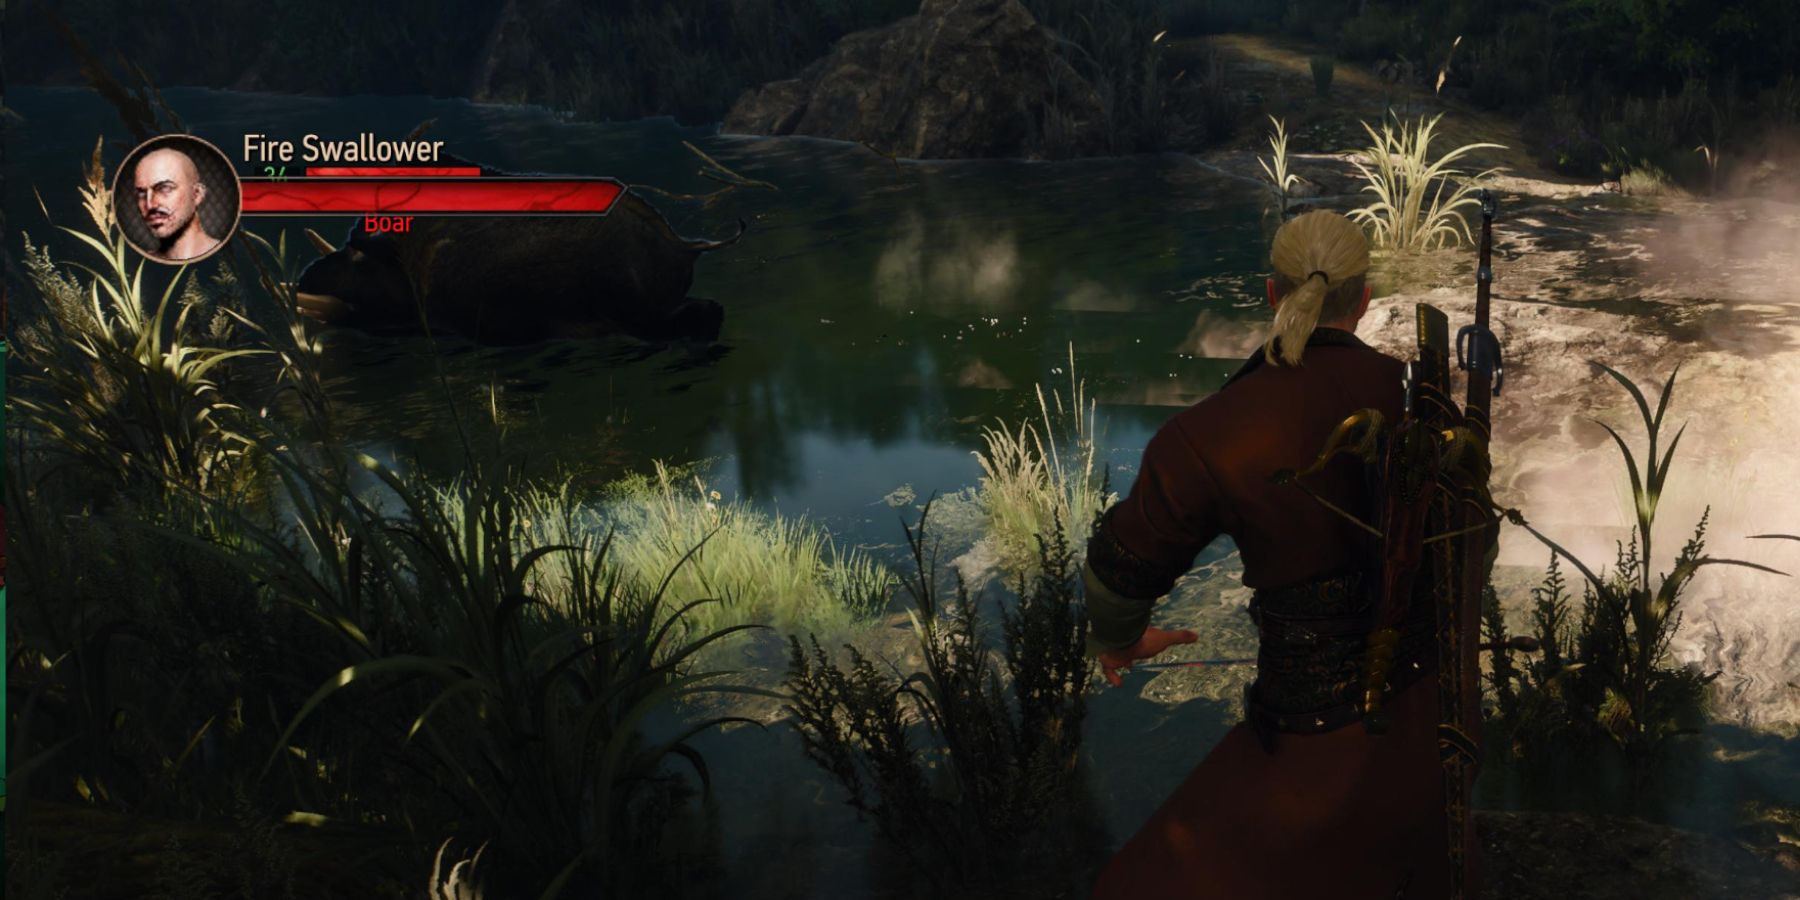 Witcher 3 - protecting the fire eater from the boar